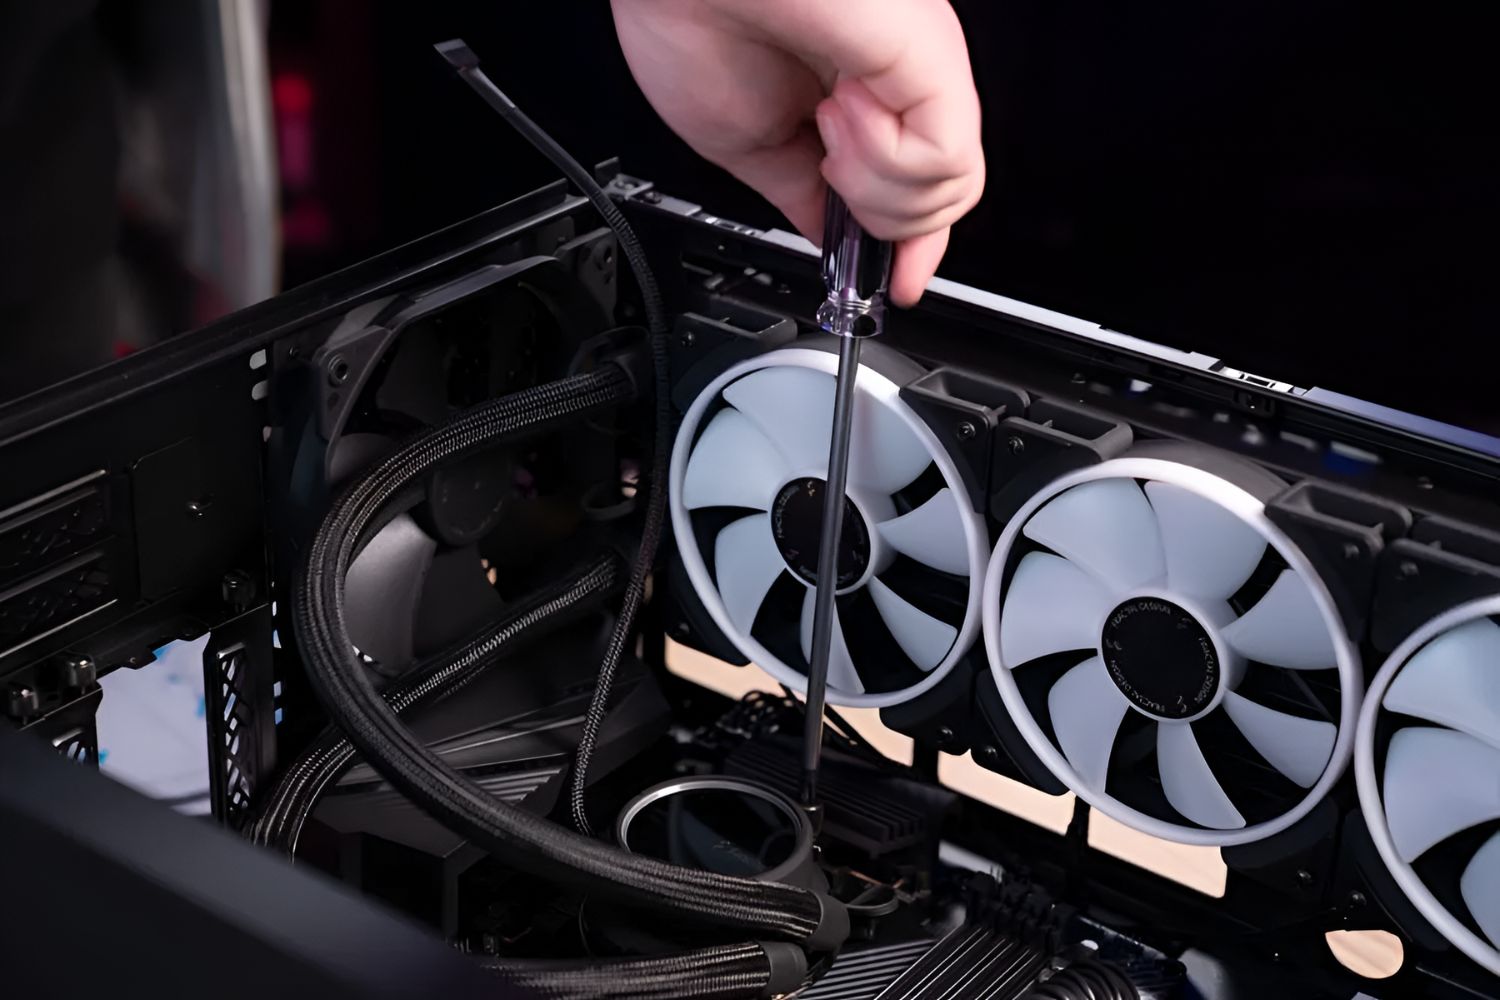 How To Replace Liquid CPU Cooler